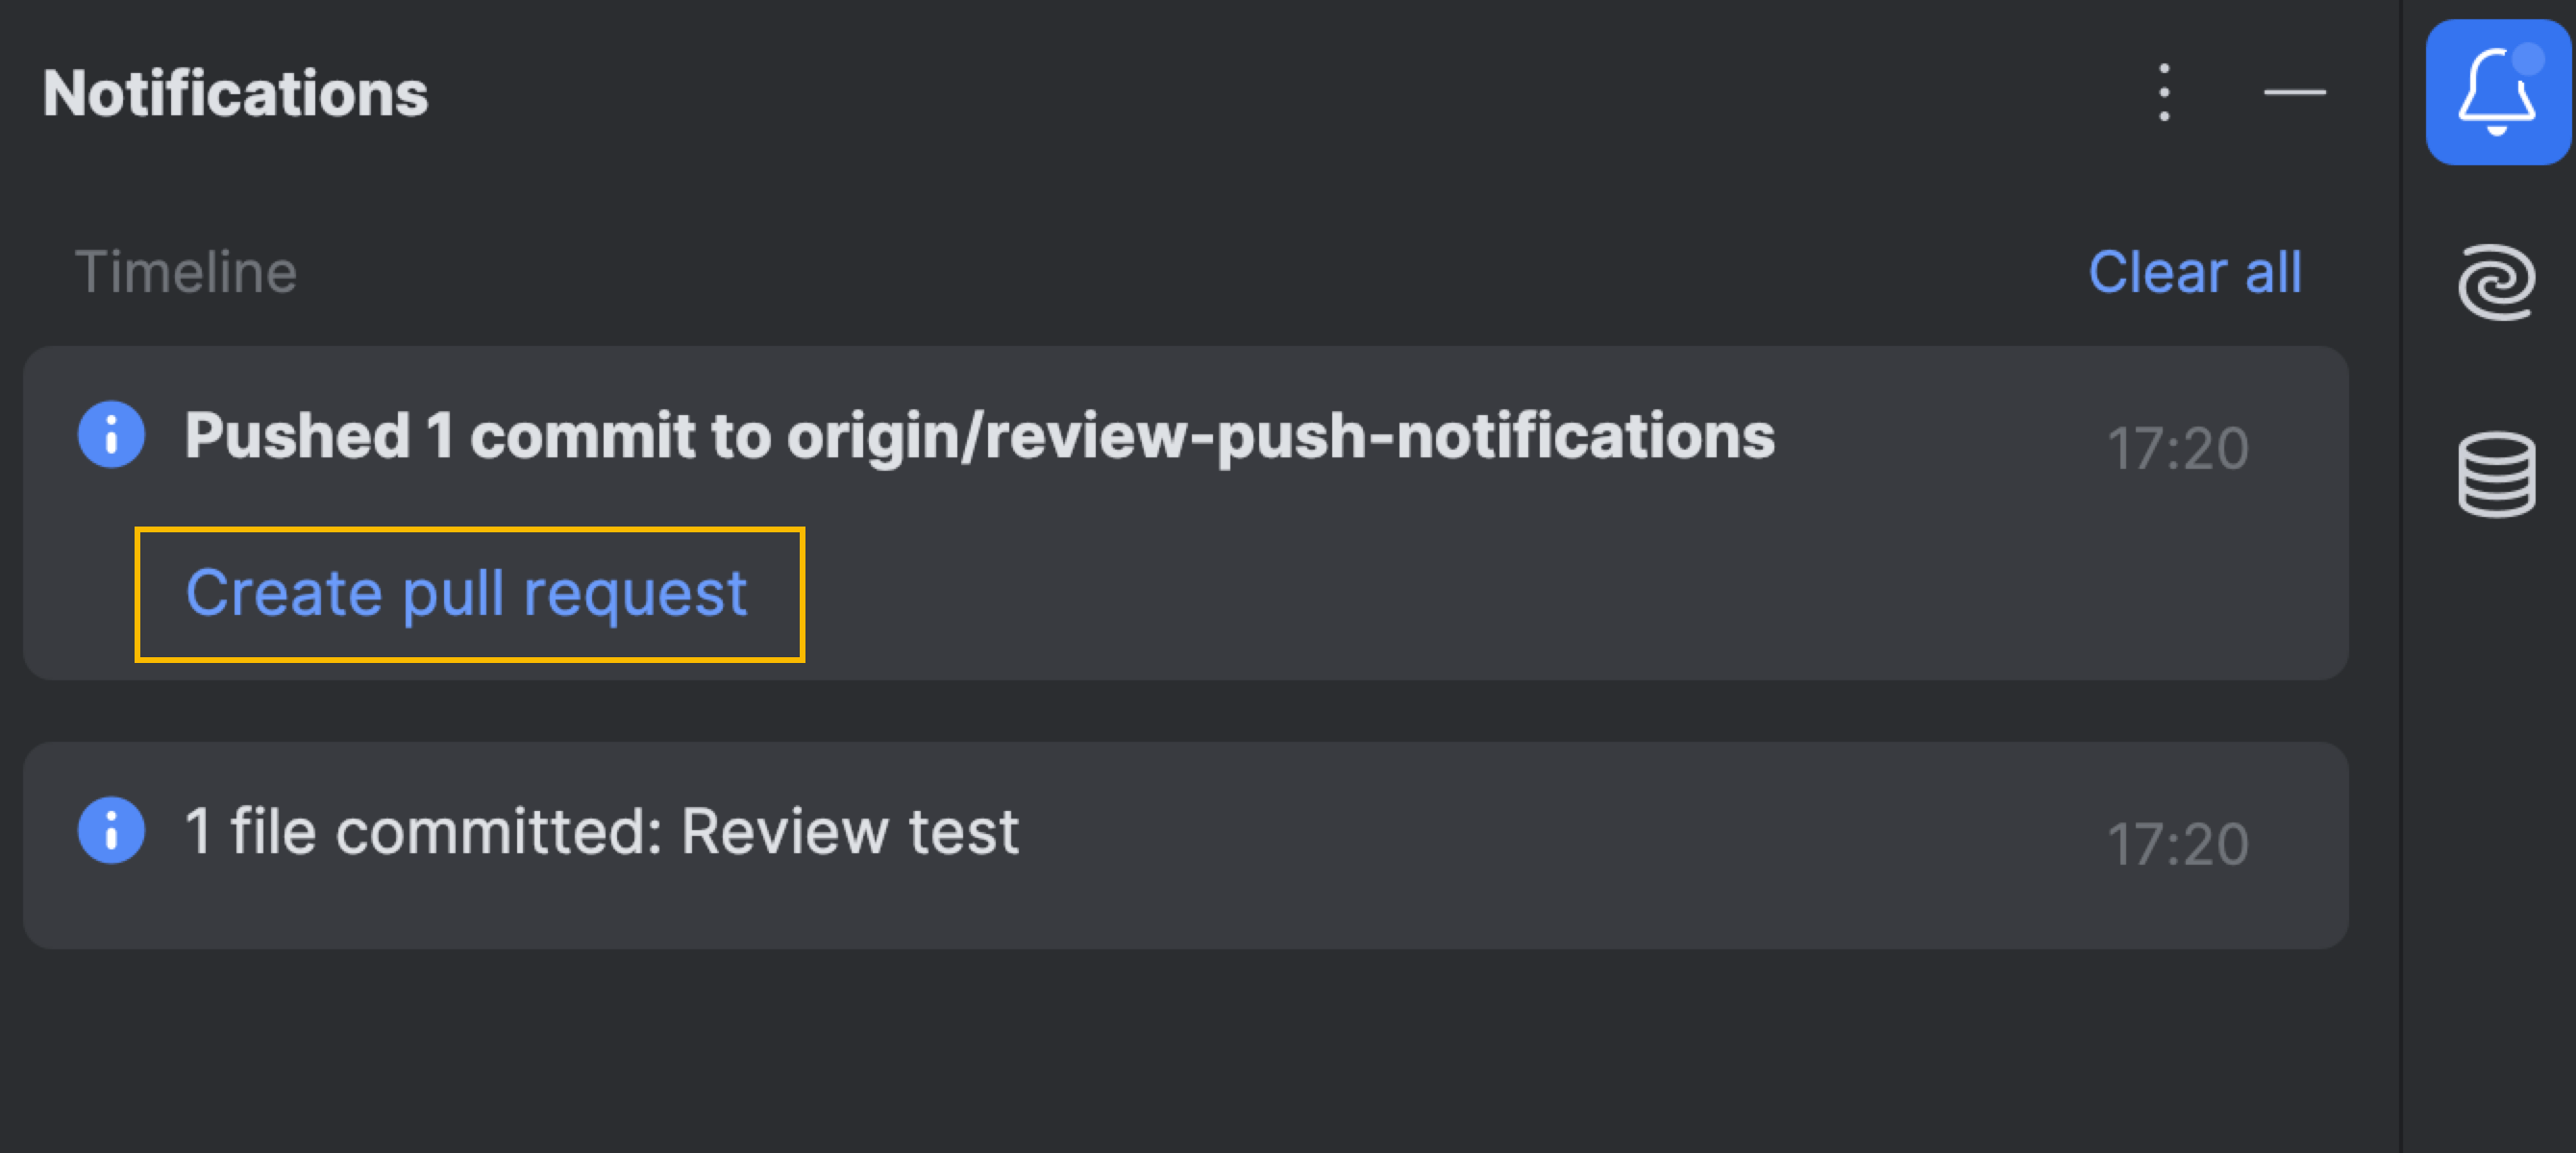 Create pull/merge requests from push notifications